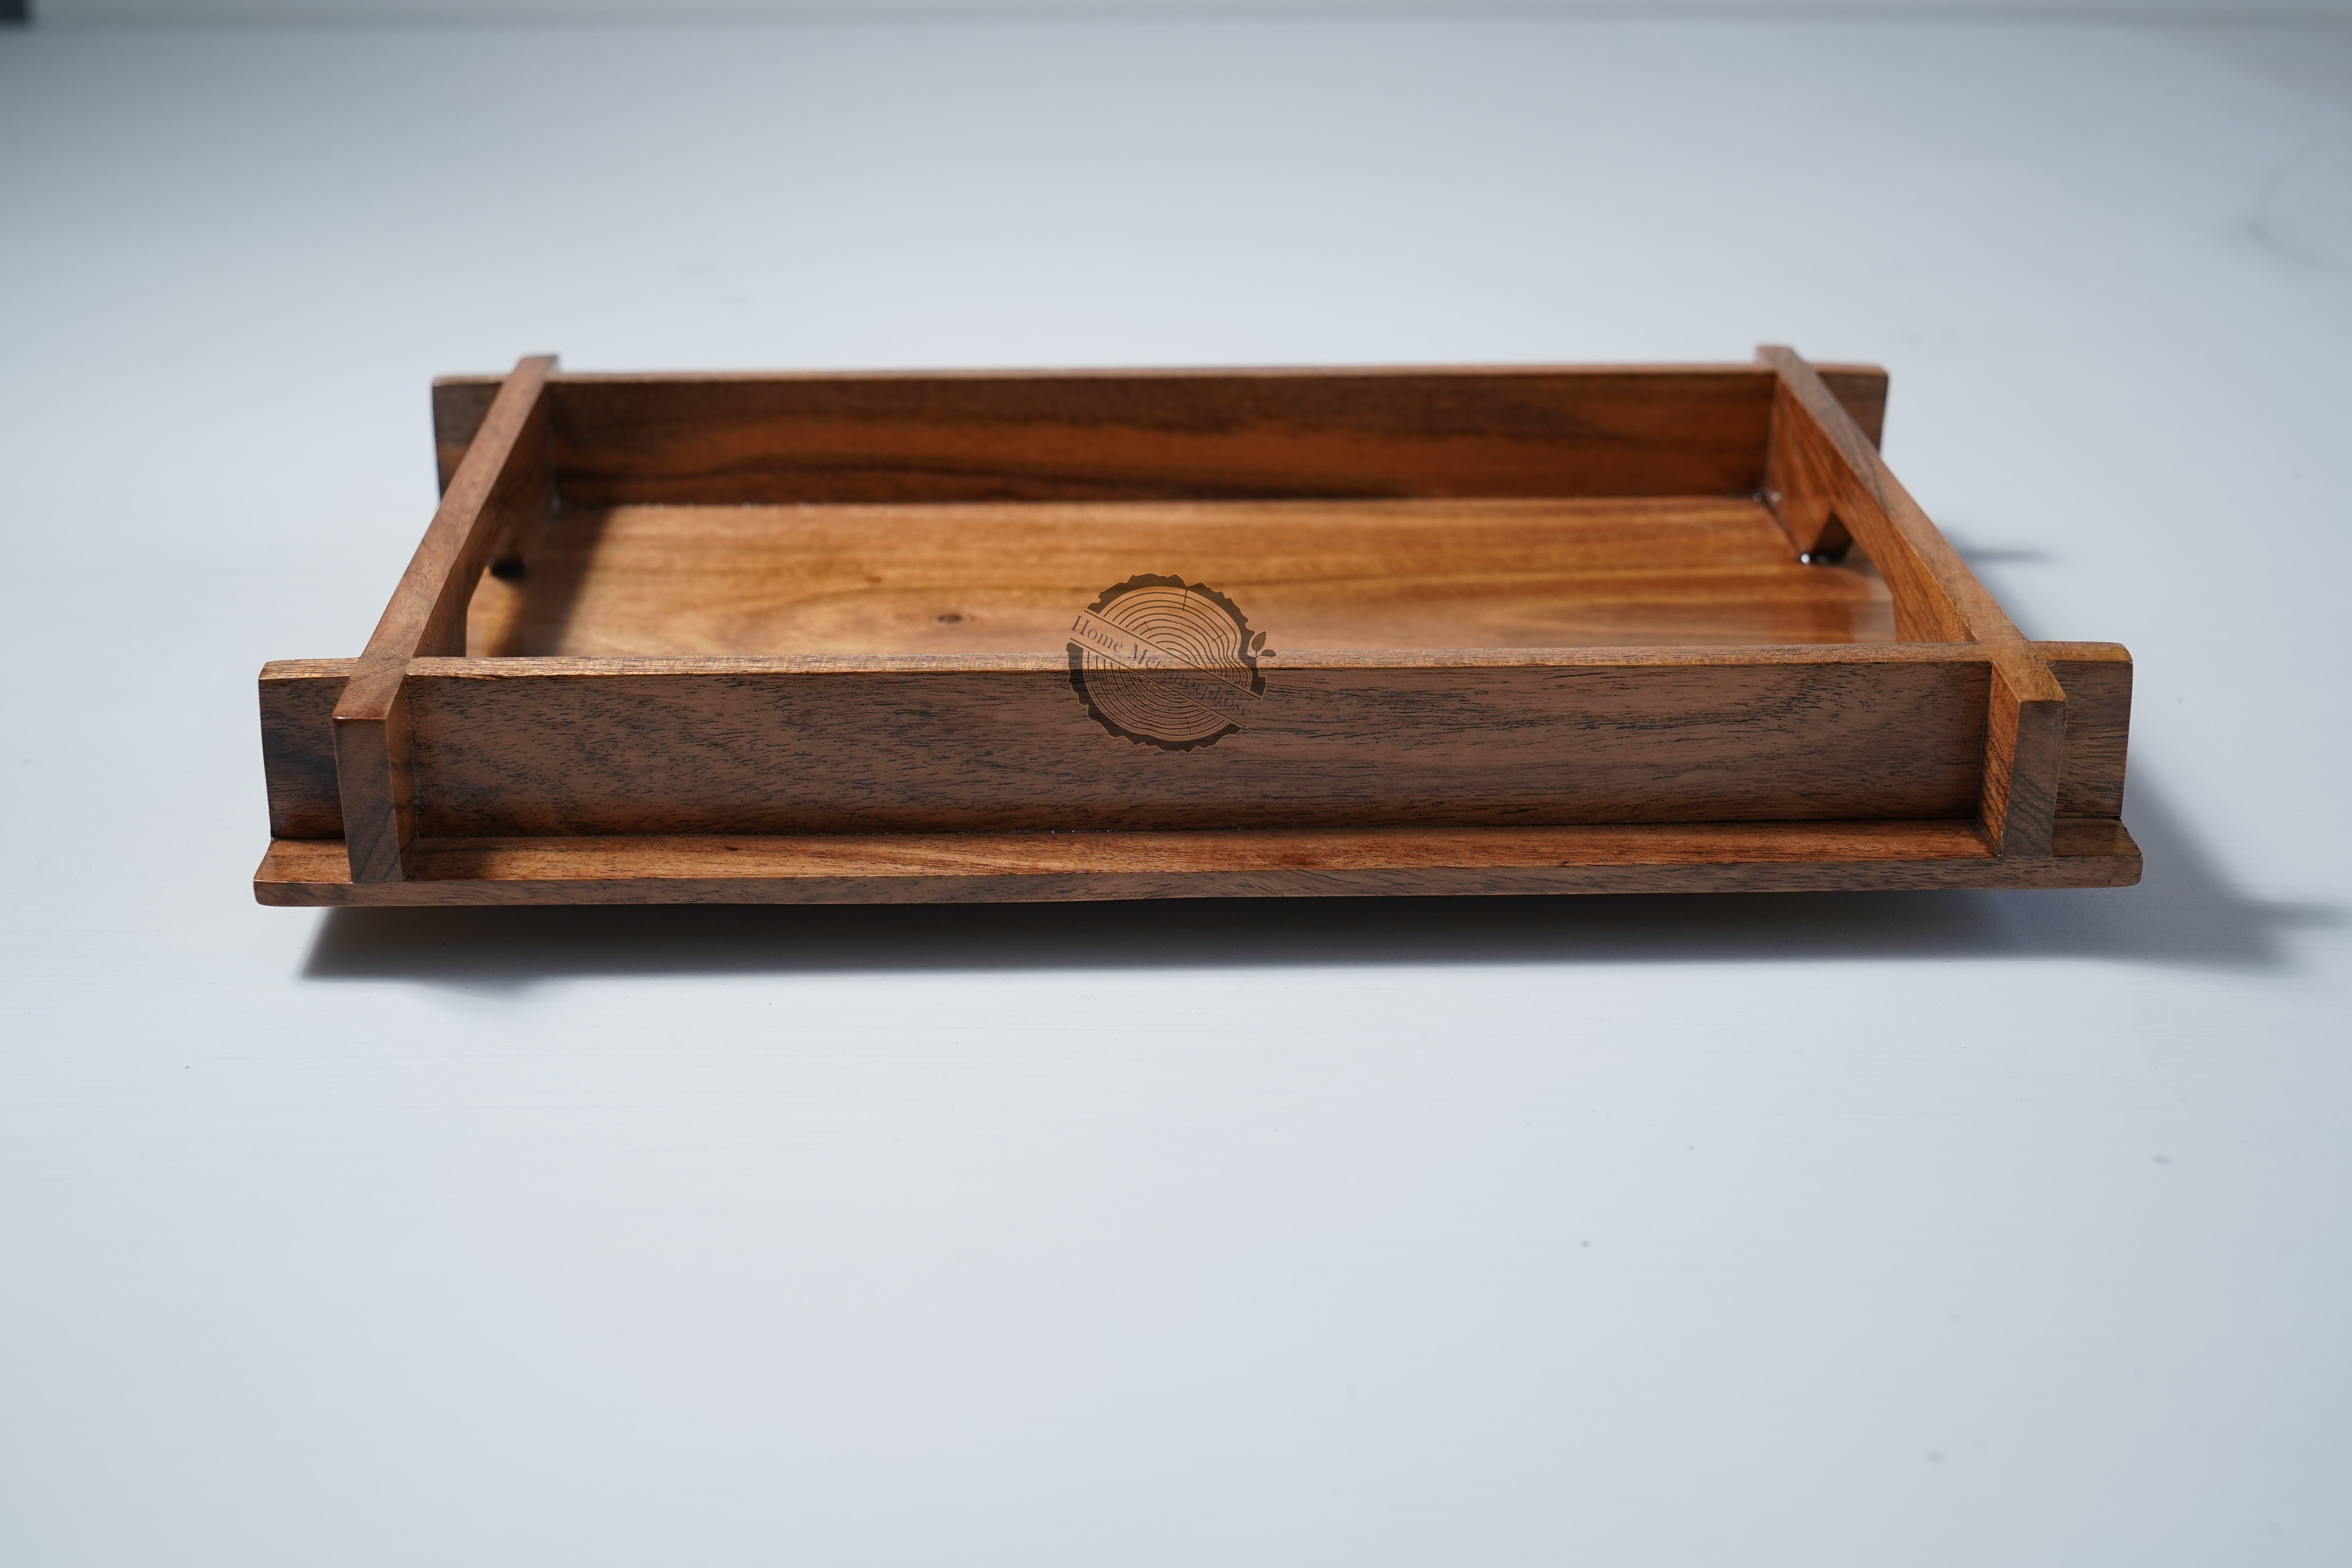 Wooden serving tray, Decorative Rustic Wood,Home Decor - Farmhouse Tray - Decorative Wood Tray - Decorative Wood Ottoman Tray - New Home Gift